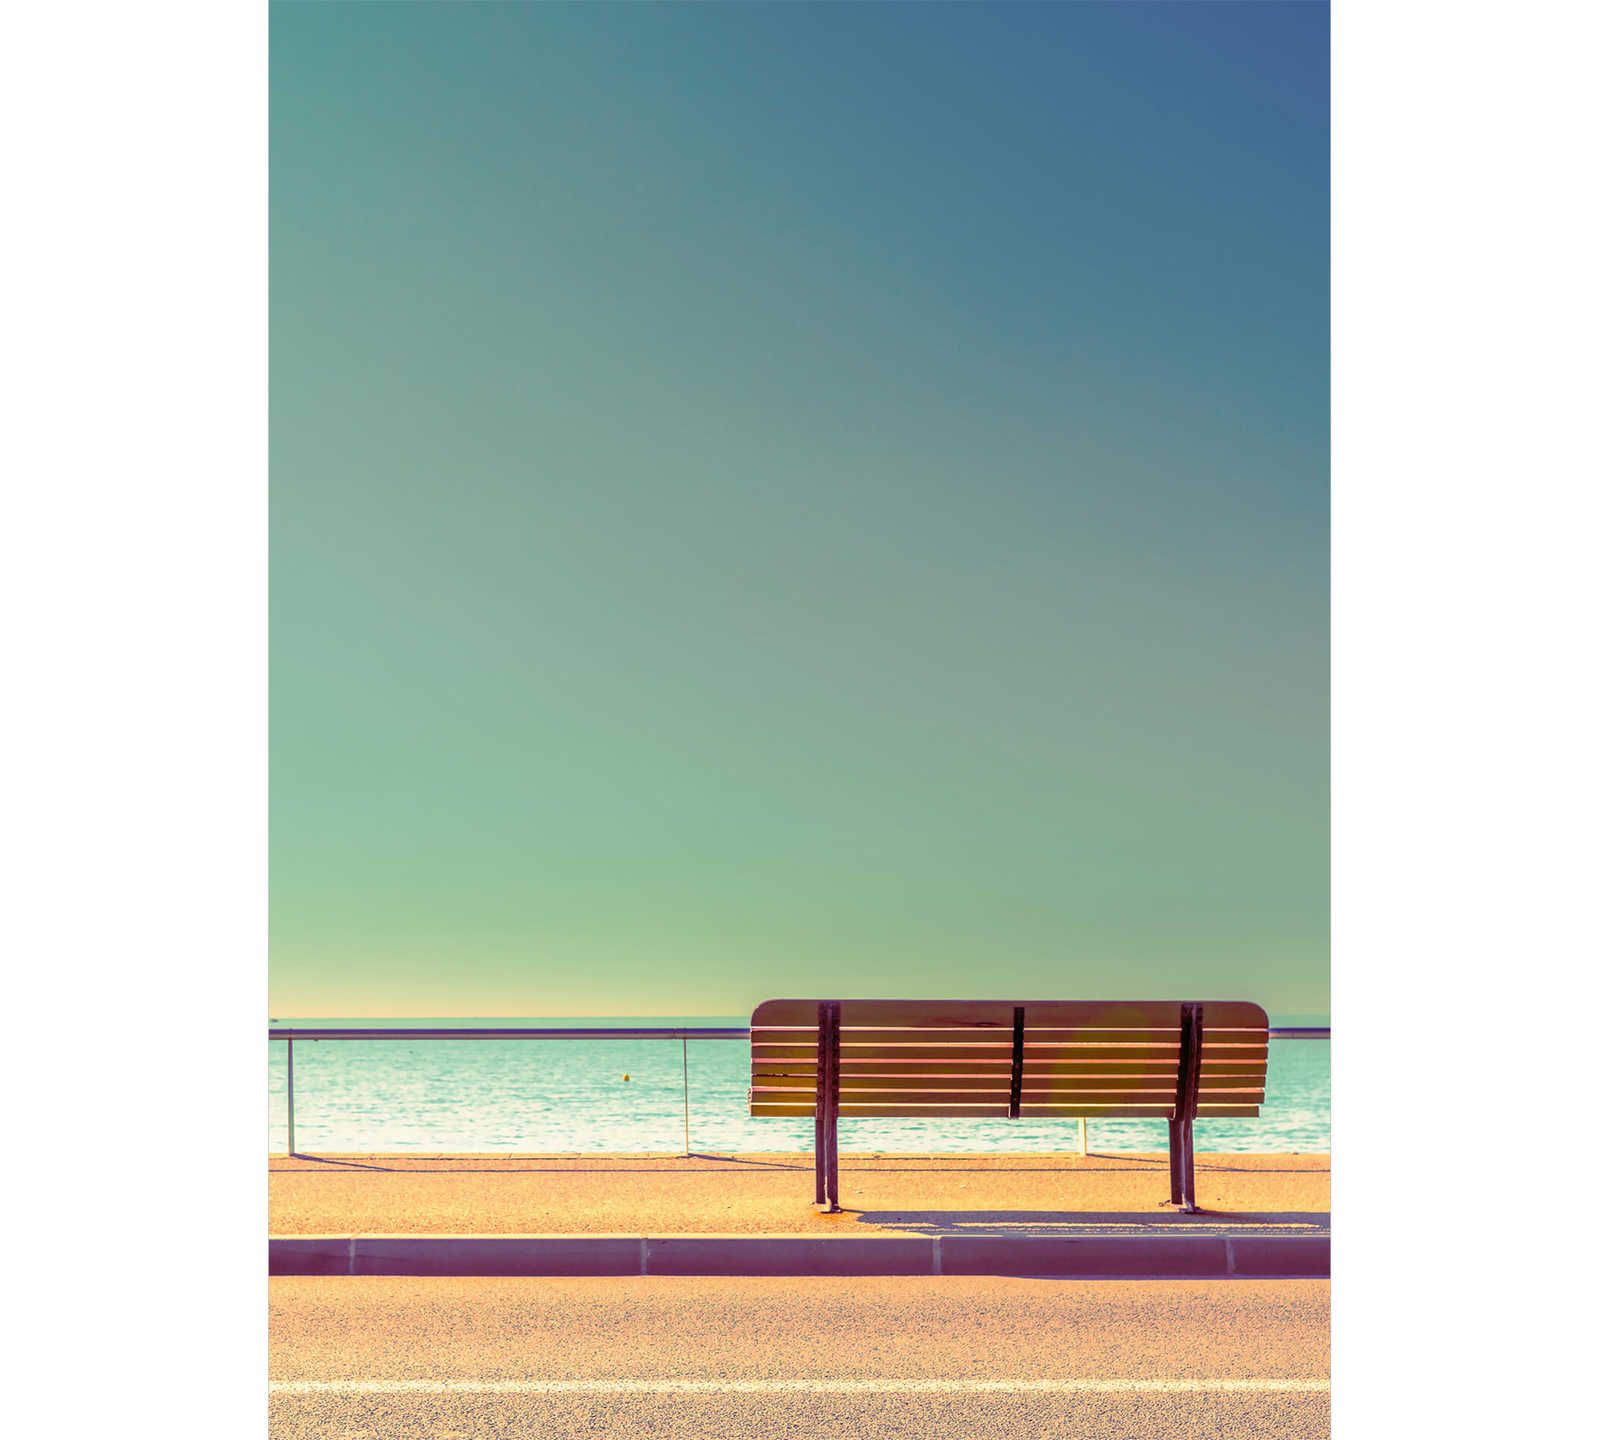 Photo wallpaper street with bench by the sea - cream, yellow
